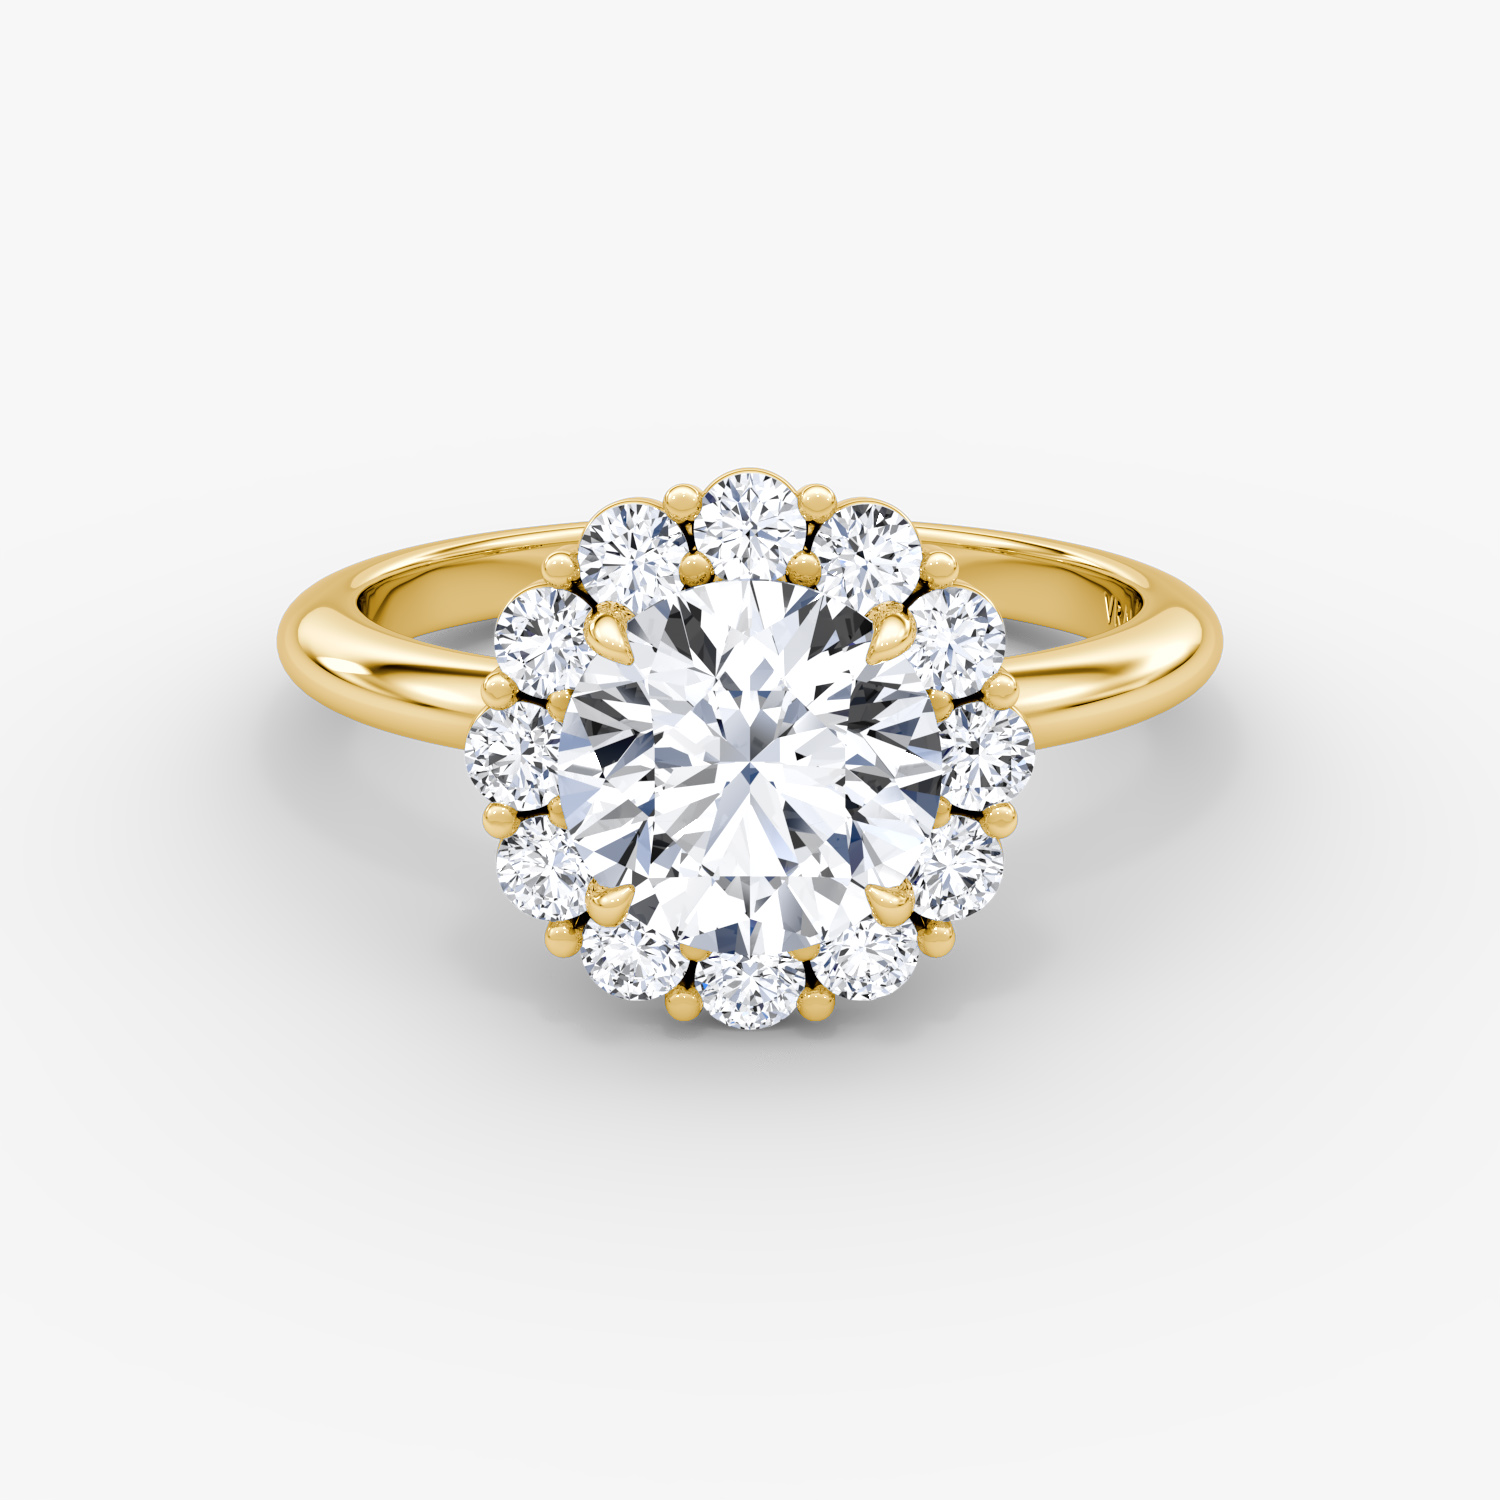 Sarvada Jewels Natural Diamonds 1 Carat Solitaire Diamond Ring in Yellow  Gold, Size: Free Size at Rs 150792 in Surat